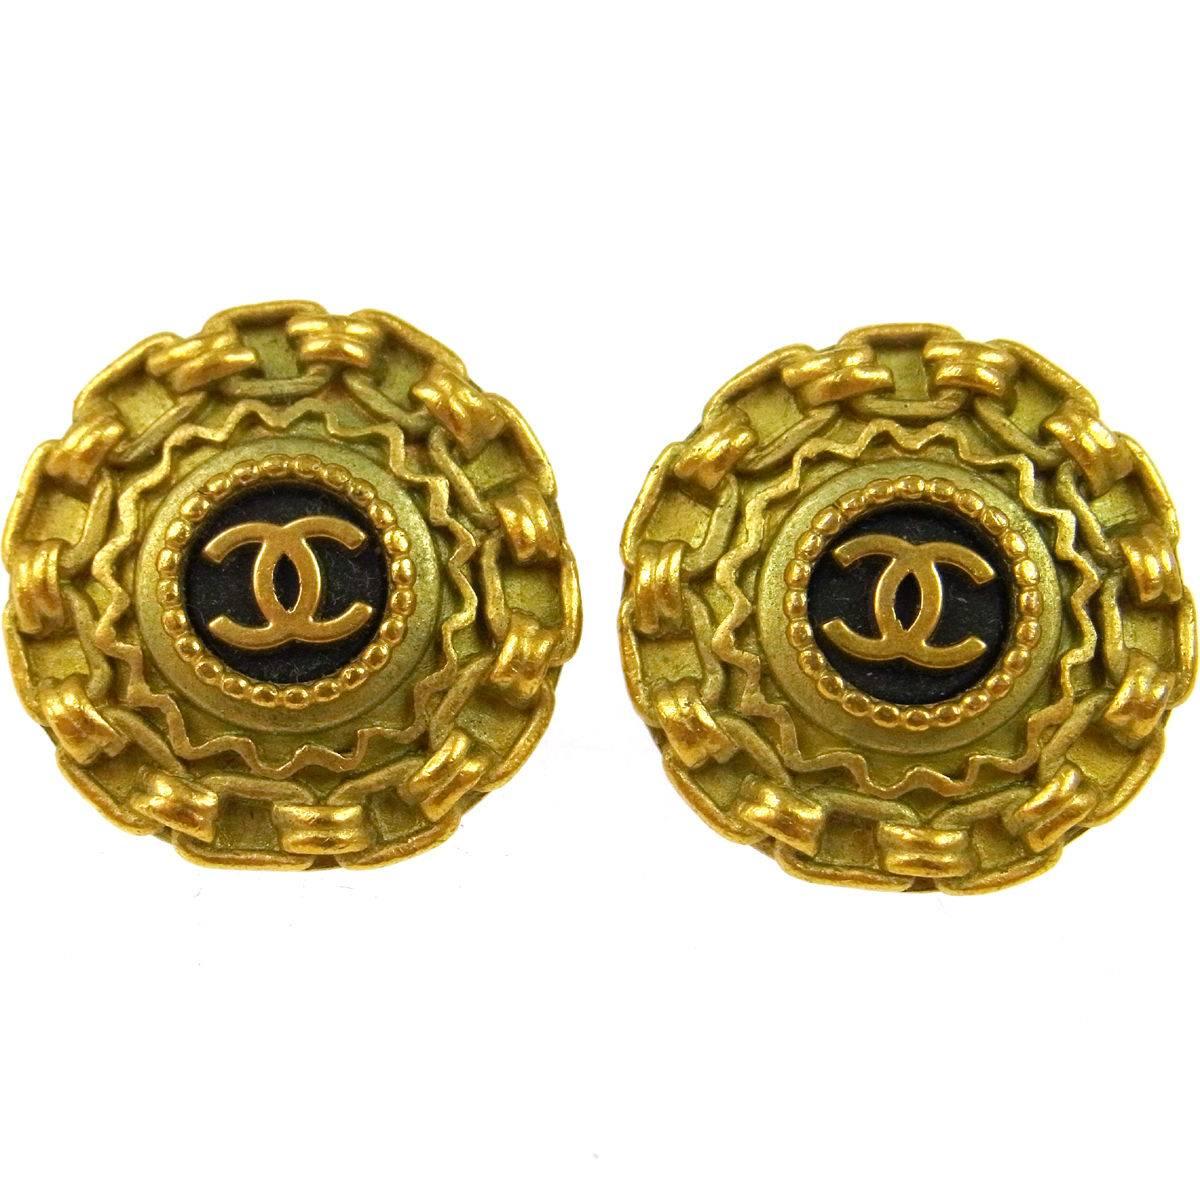 Chanel Gold Textured Chain Link Charm Evening Stud Earrings